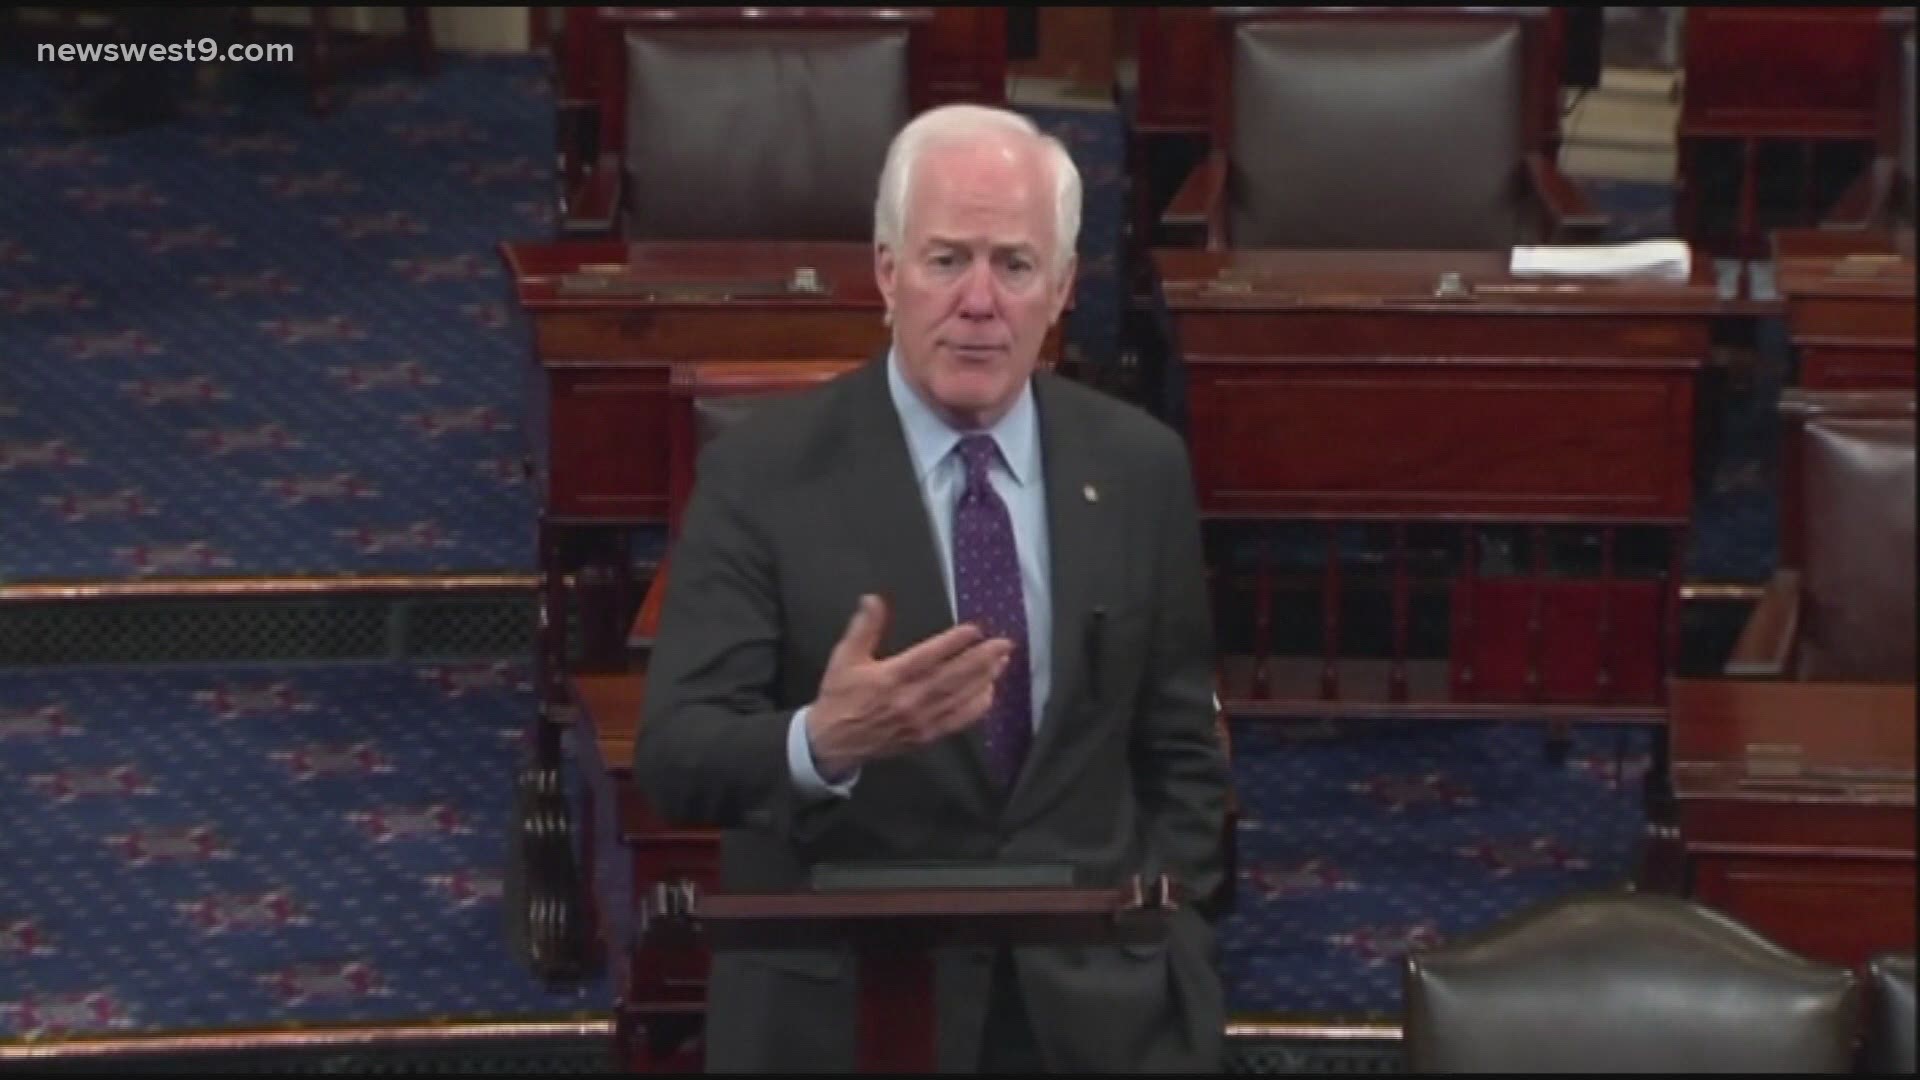 U.S. Senator John Cornyn has announced the Save Our Stages Act, a bill providing relief to music and entertainment venues suffering because of the pandemic.